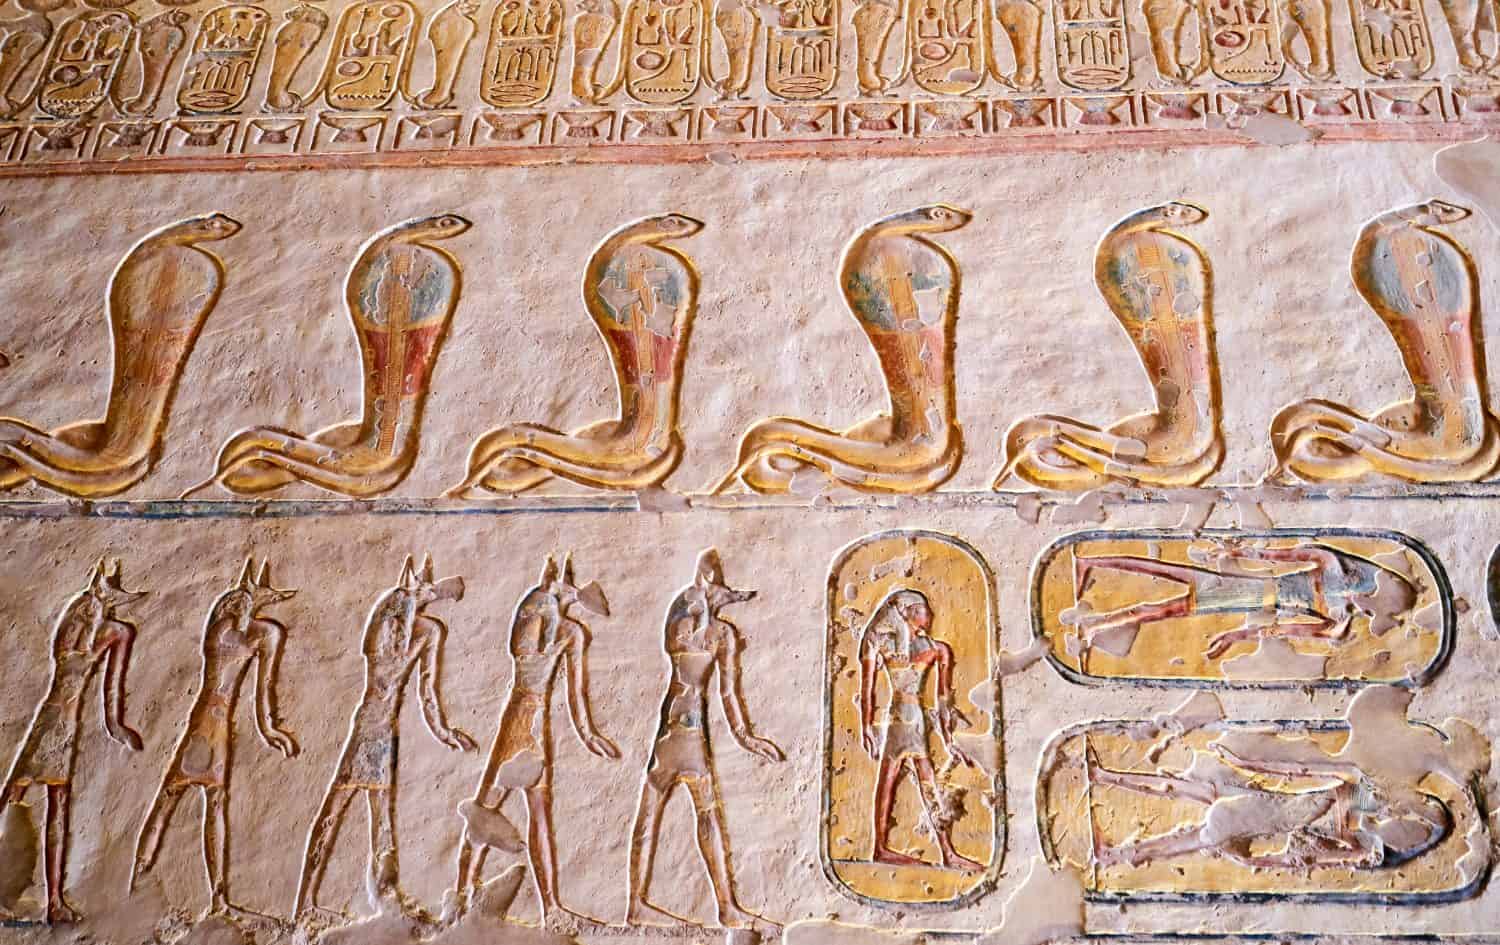                           Egyptian hieroglyphs of Wadjet, the protector cobra godess inside a tomb. Valley of the Kings, Egypt.   